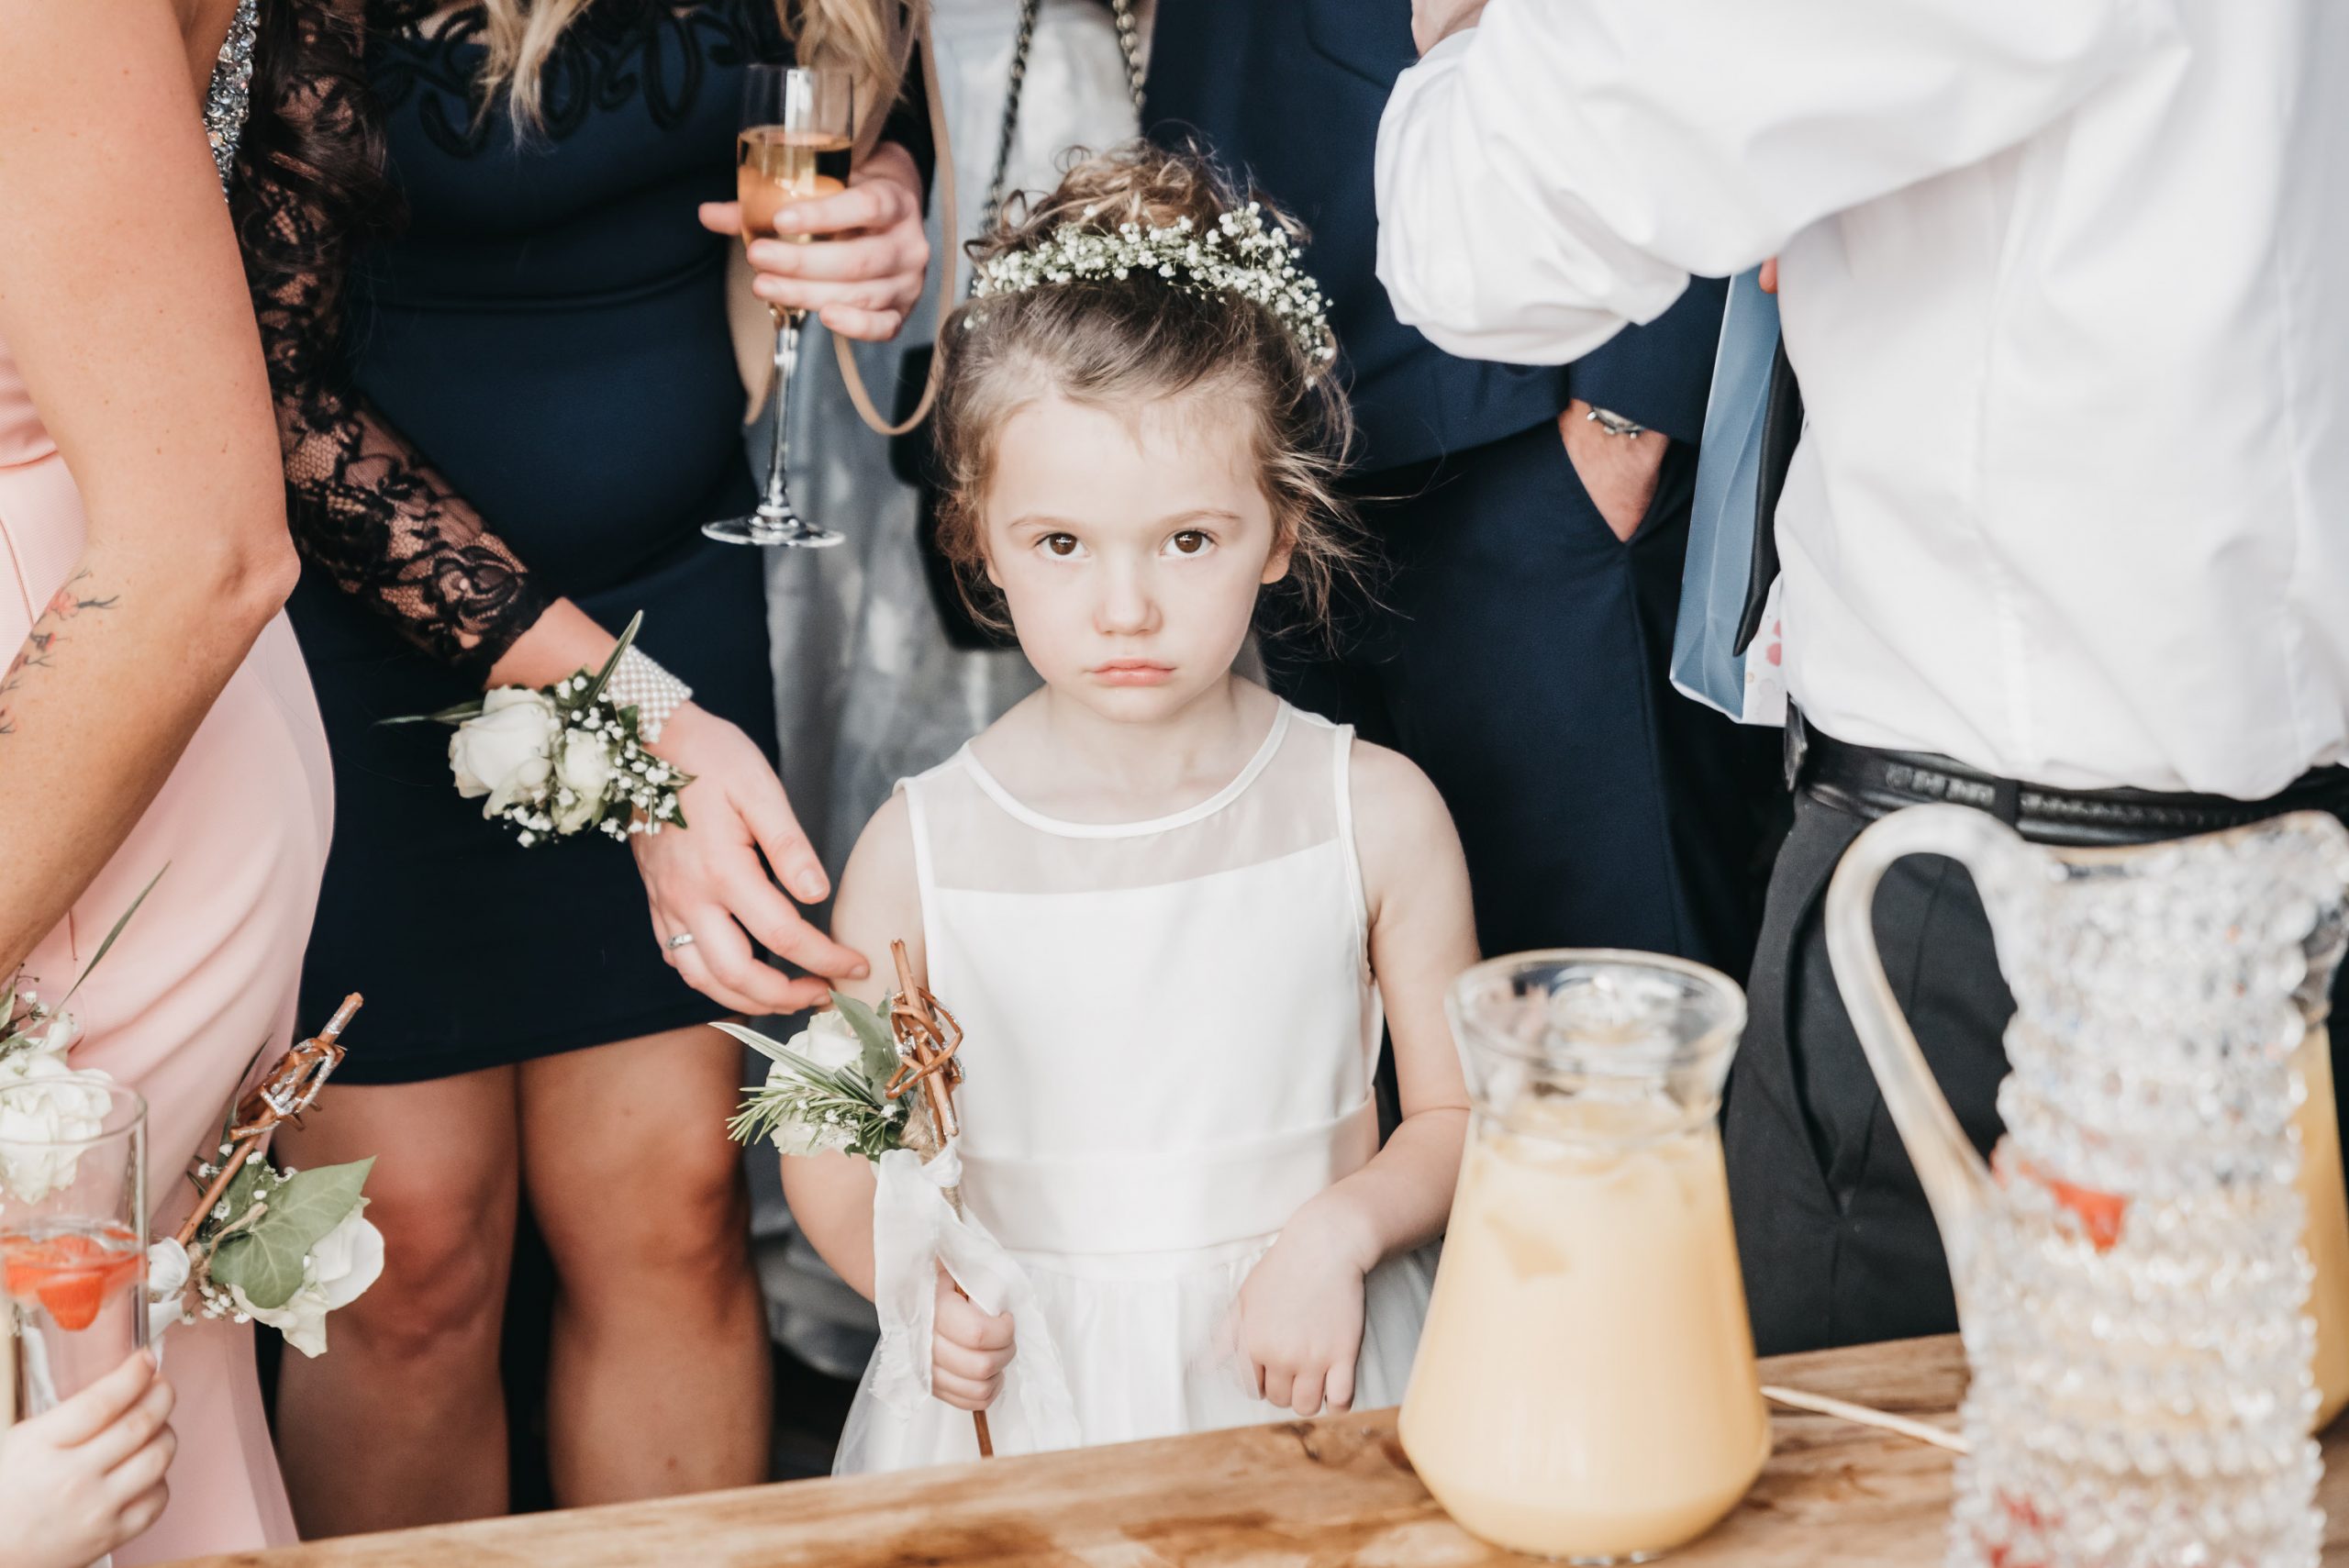 This image is of a little flower girl at a wedding looking directly into the camera, the expression on her face is one of been not happy